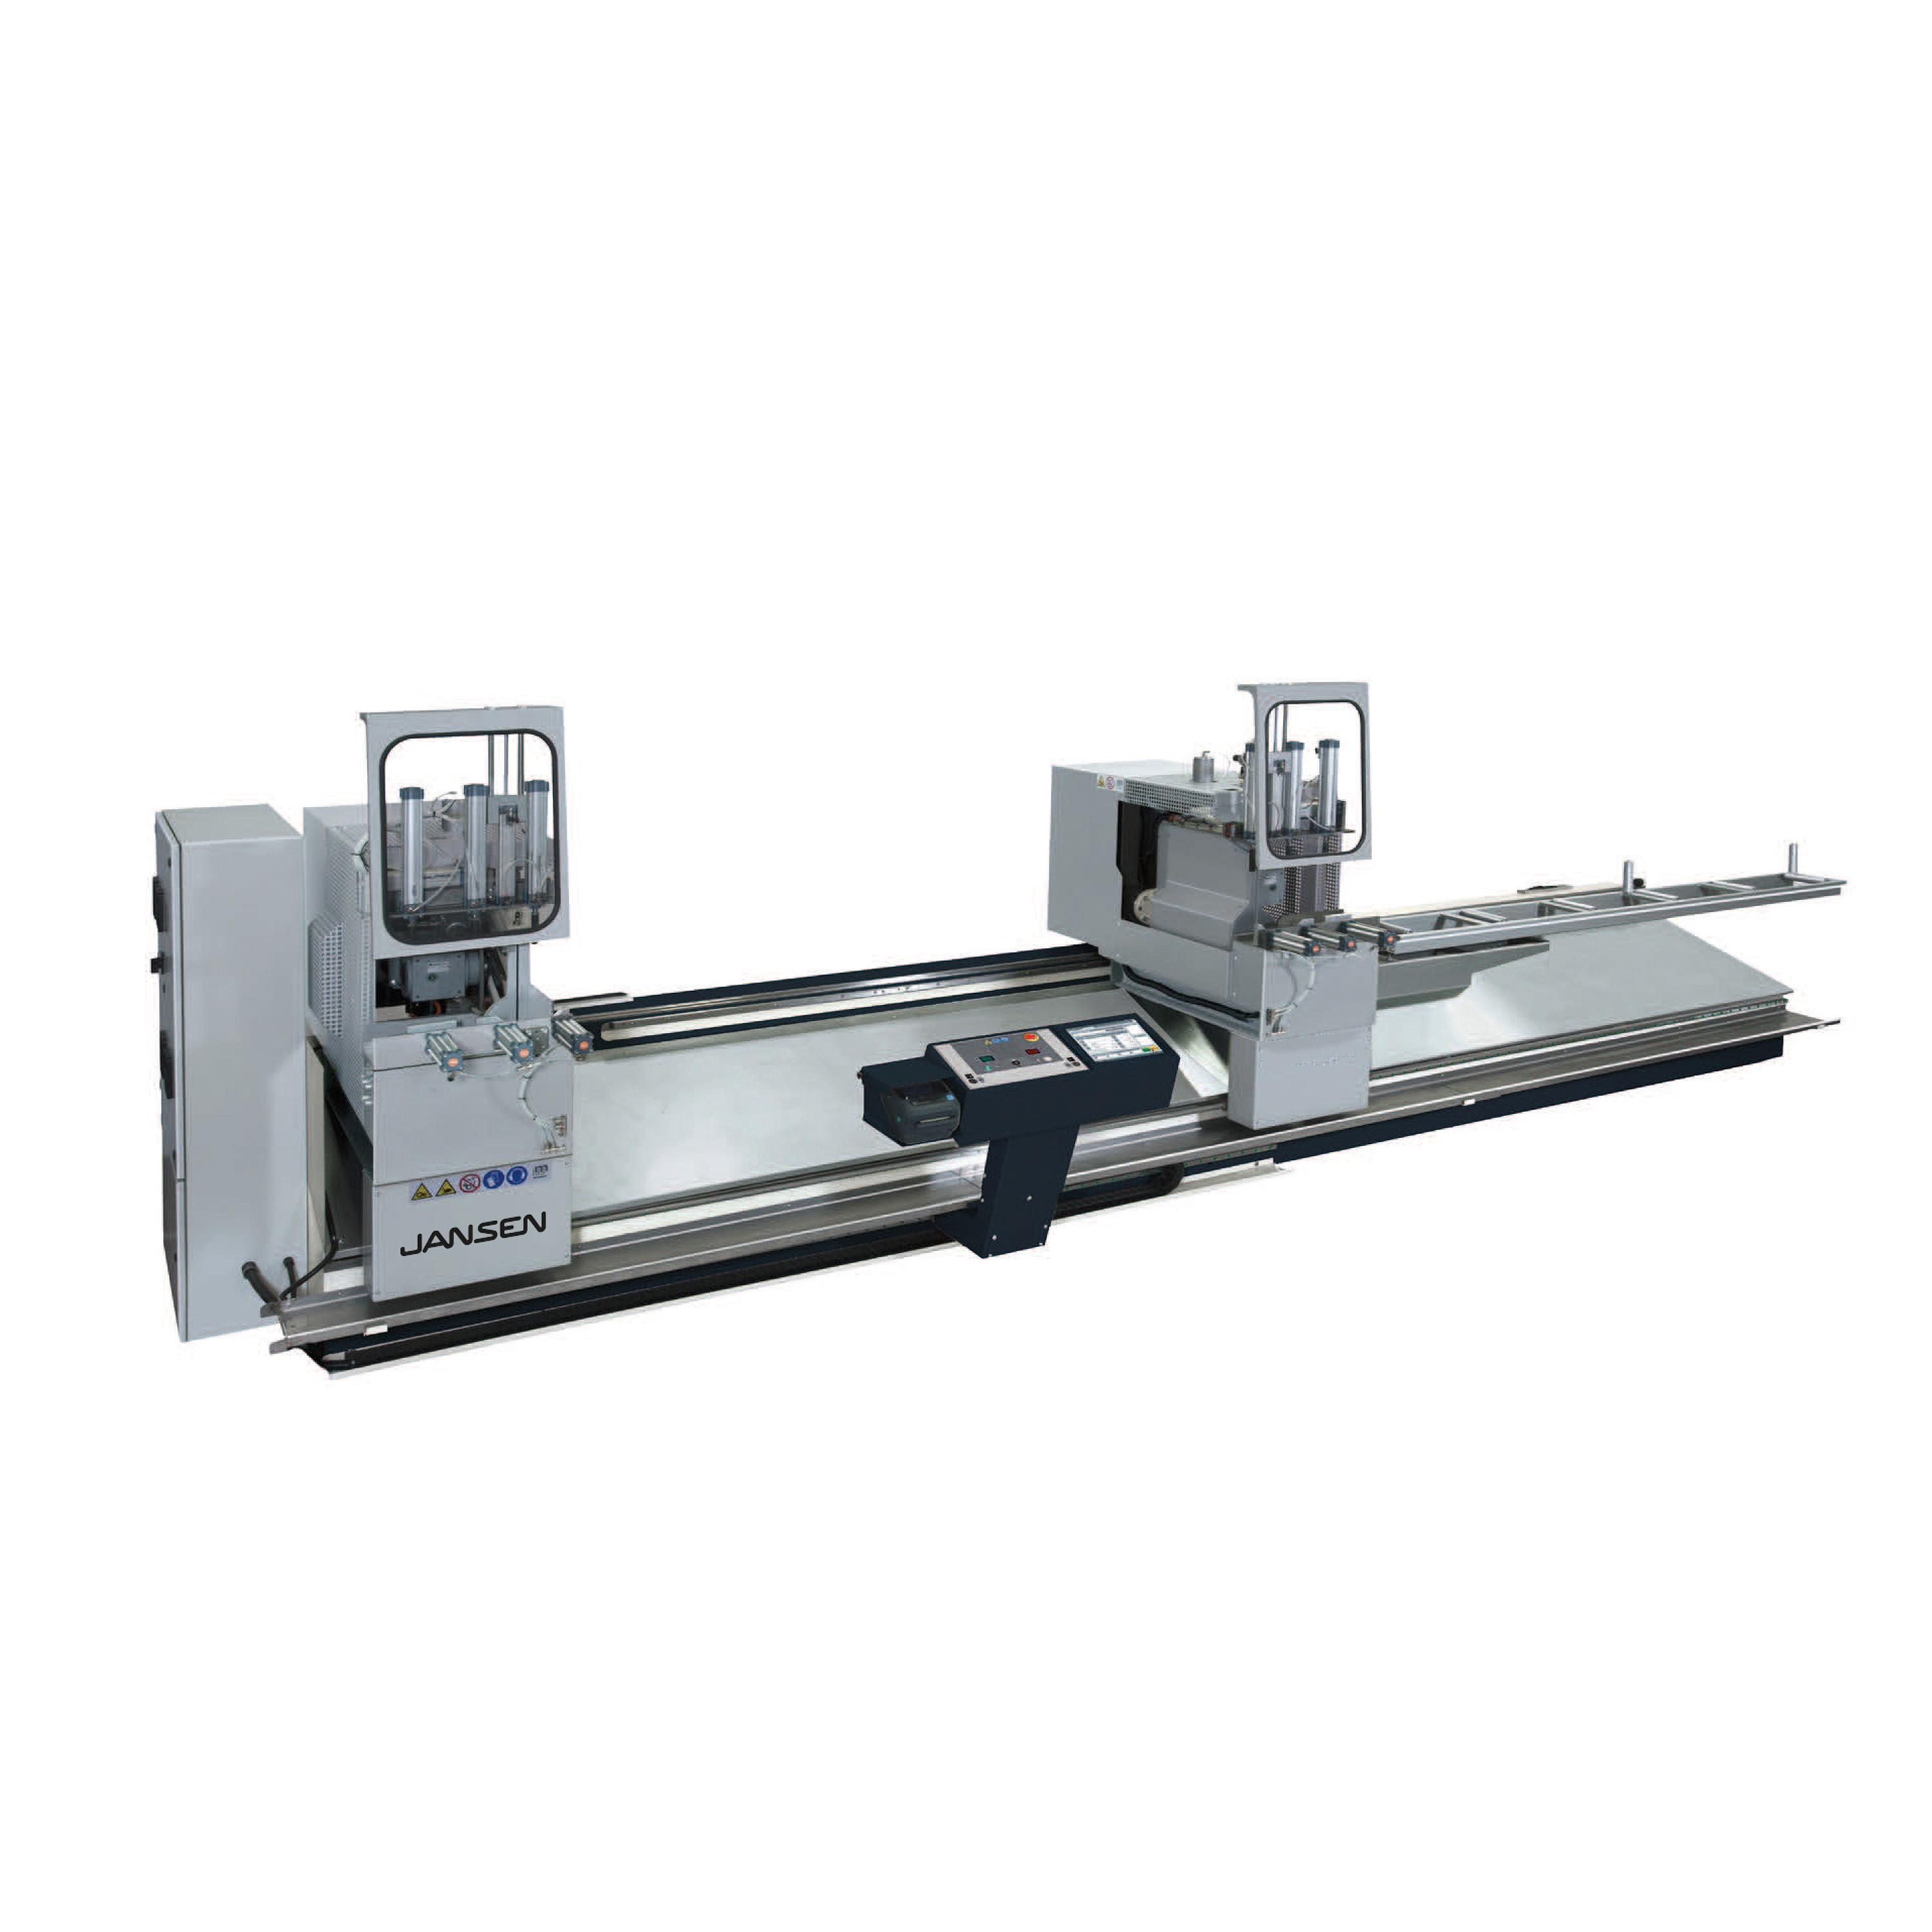 Double-headed mitre profile saw PDG Steel 400